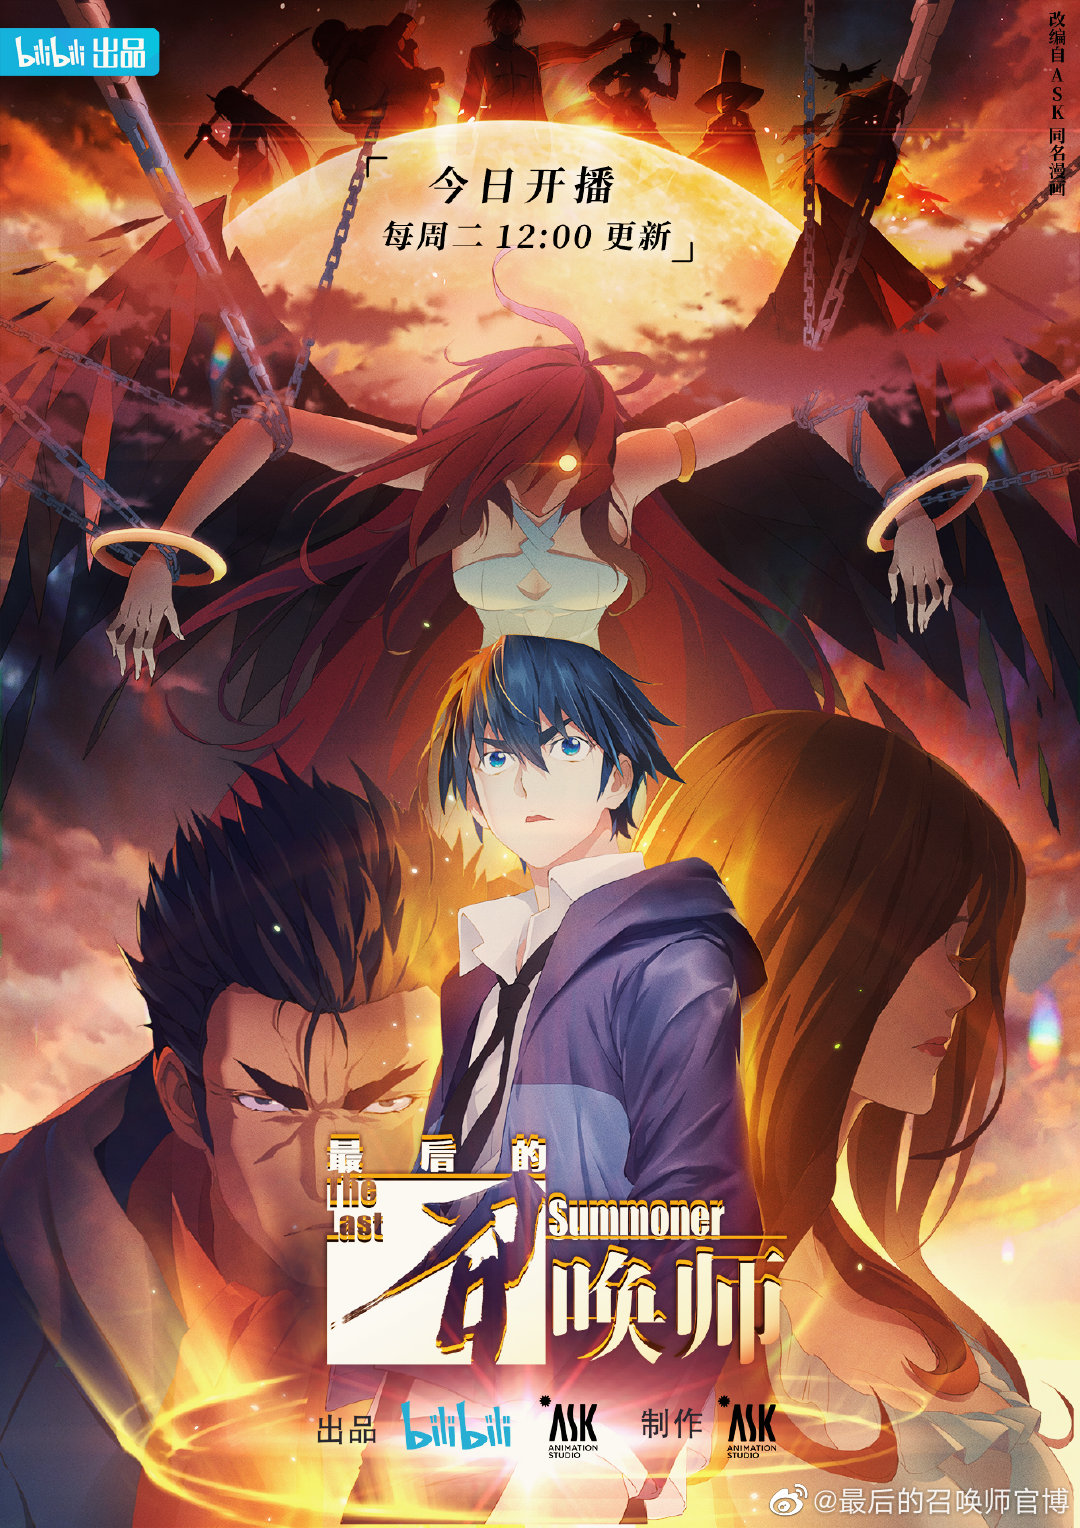 The Last Summoner donghua release 'The Last Summoner' Chinese Anime Release & Updates